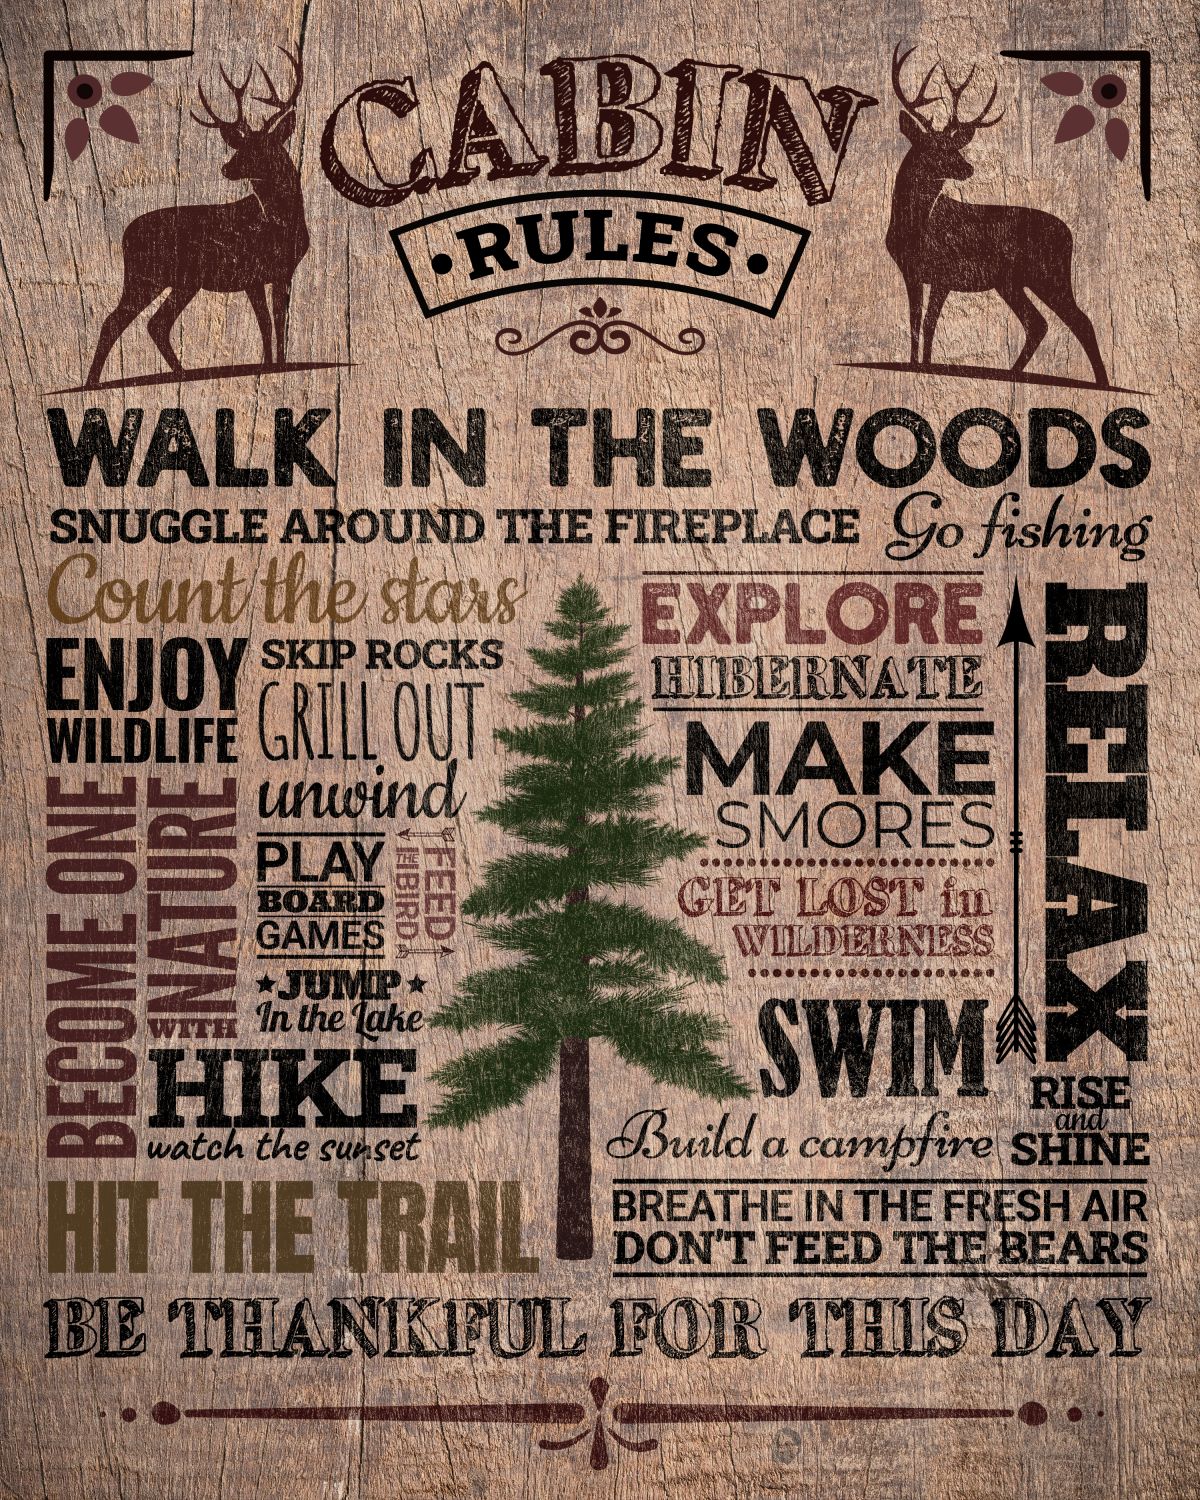 Cabin Rules IV